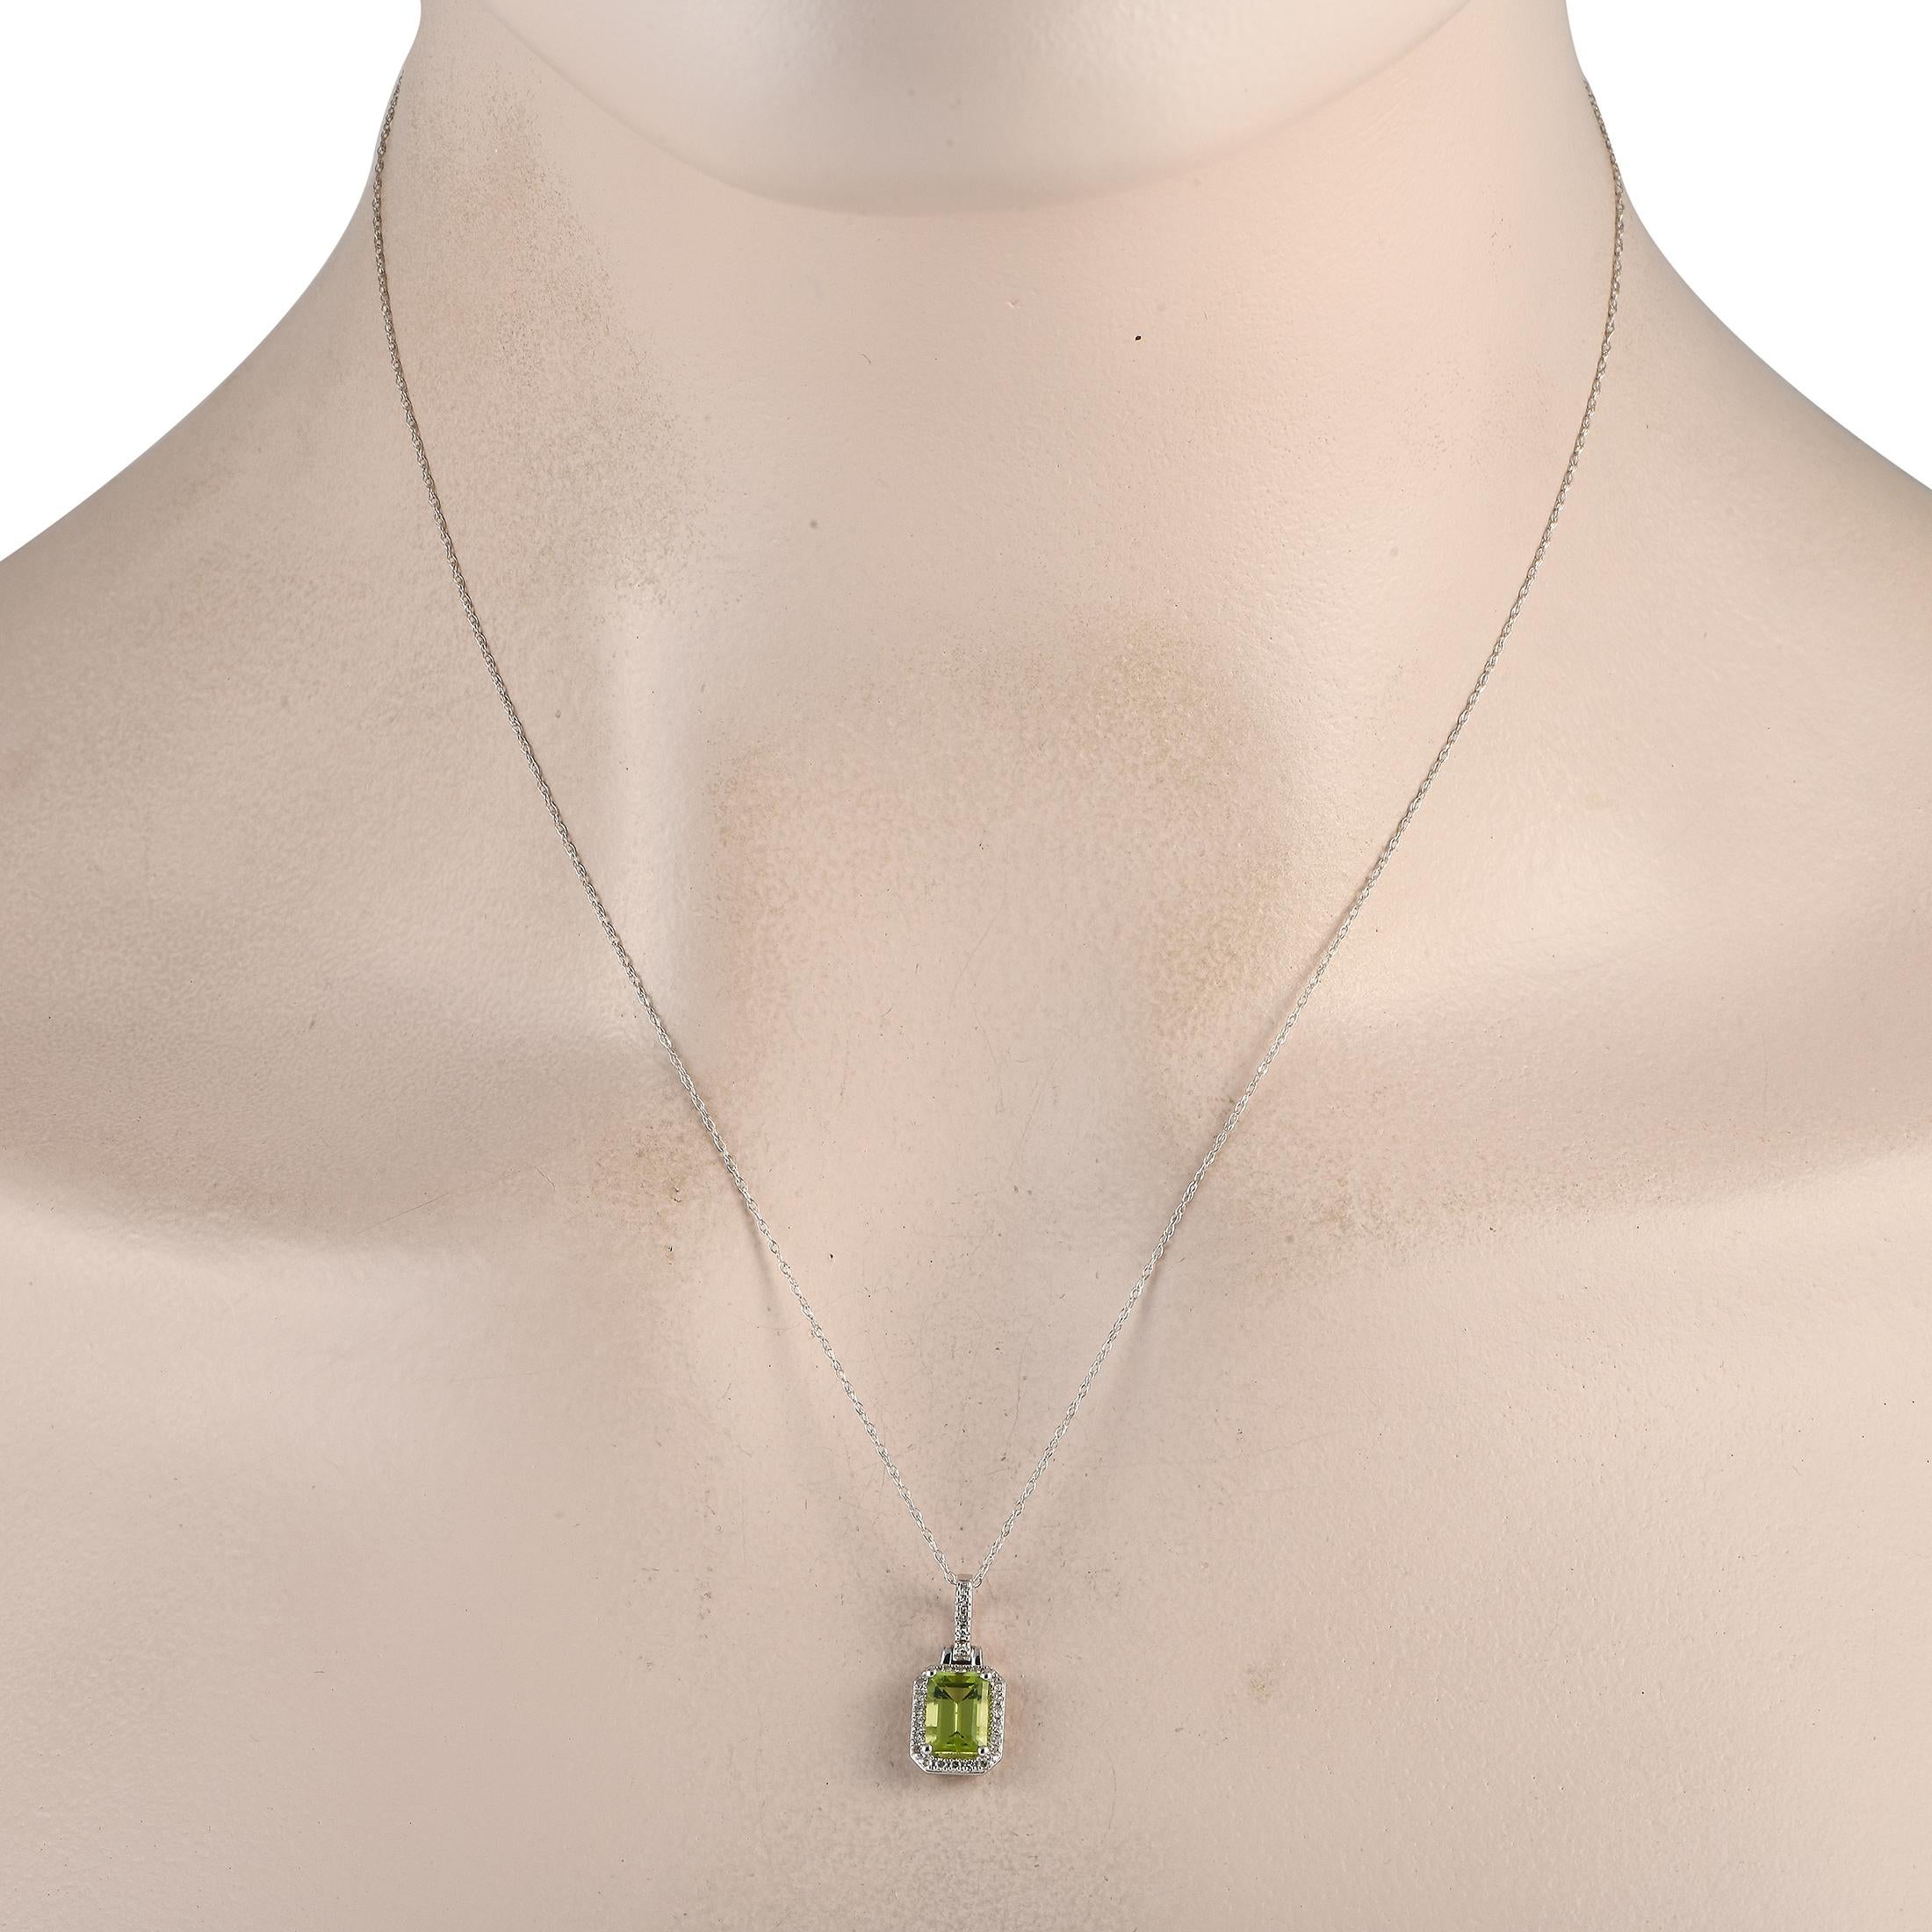 A lime green peridot adds a vibrant hue to this diamond necklace, making it the perfect choice to make an outfit stand out. This LB Exclusive piece comes with a delicate white gold chain measuring 18 long. The pendant measures 0.65 by 0.30 aand has